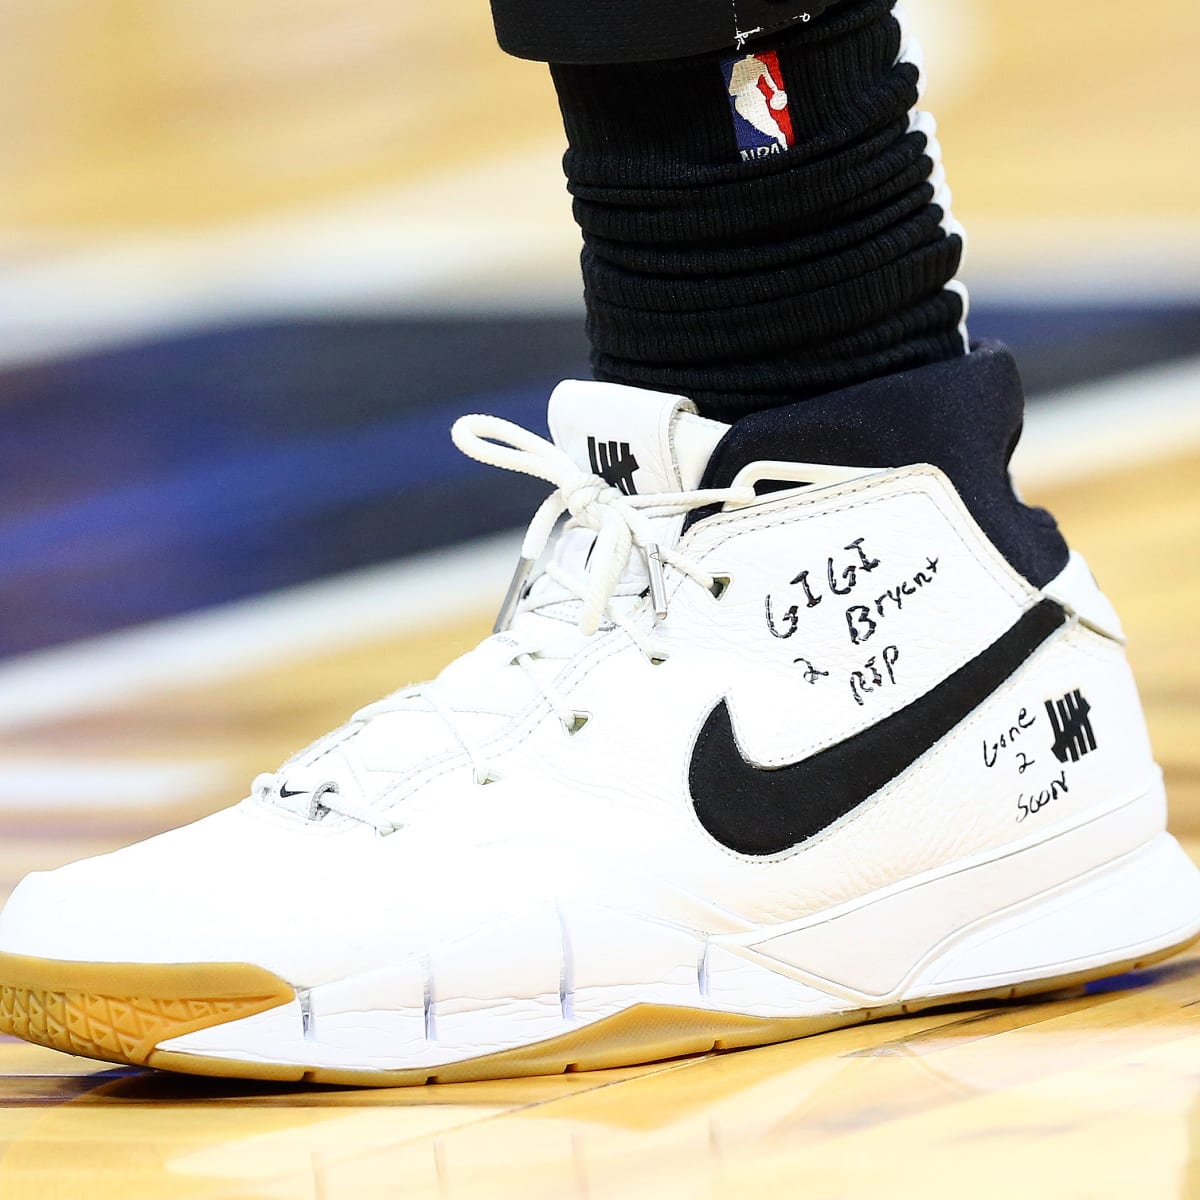 Kobe Bryant Death Nba Players Pay Tribute With Sneakers Sports Illustrated